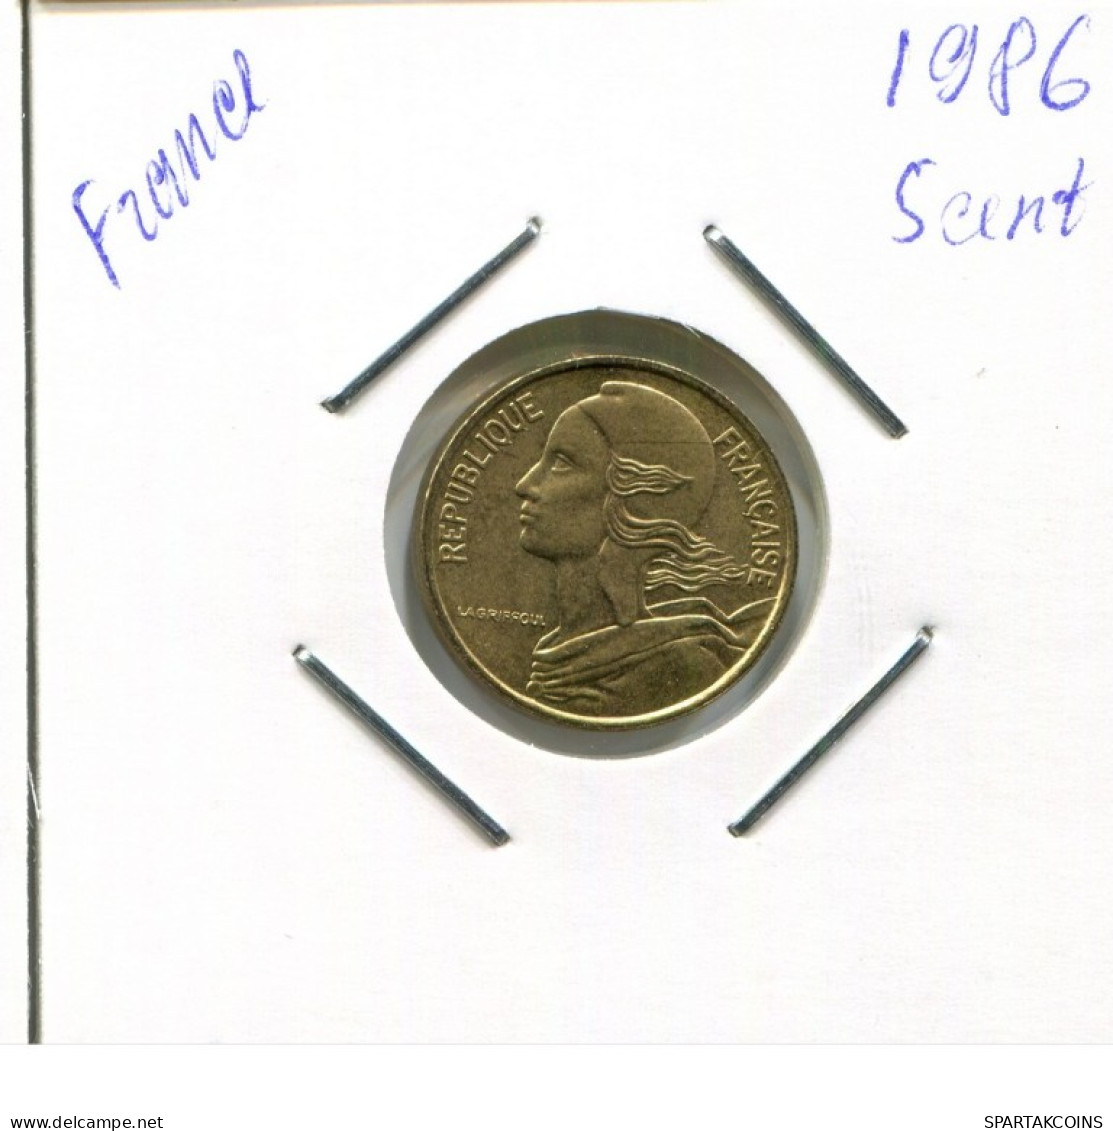 5 CENTIMES 1986 FRANCE Coin French Coin #AN821.U.A - 5 Centimes